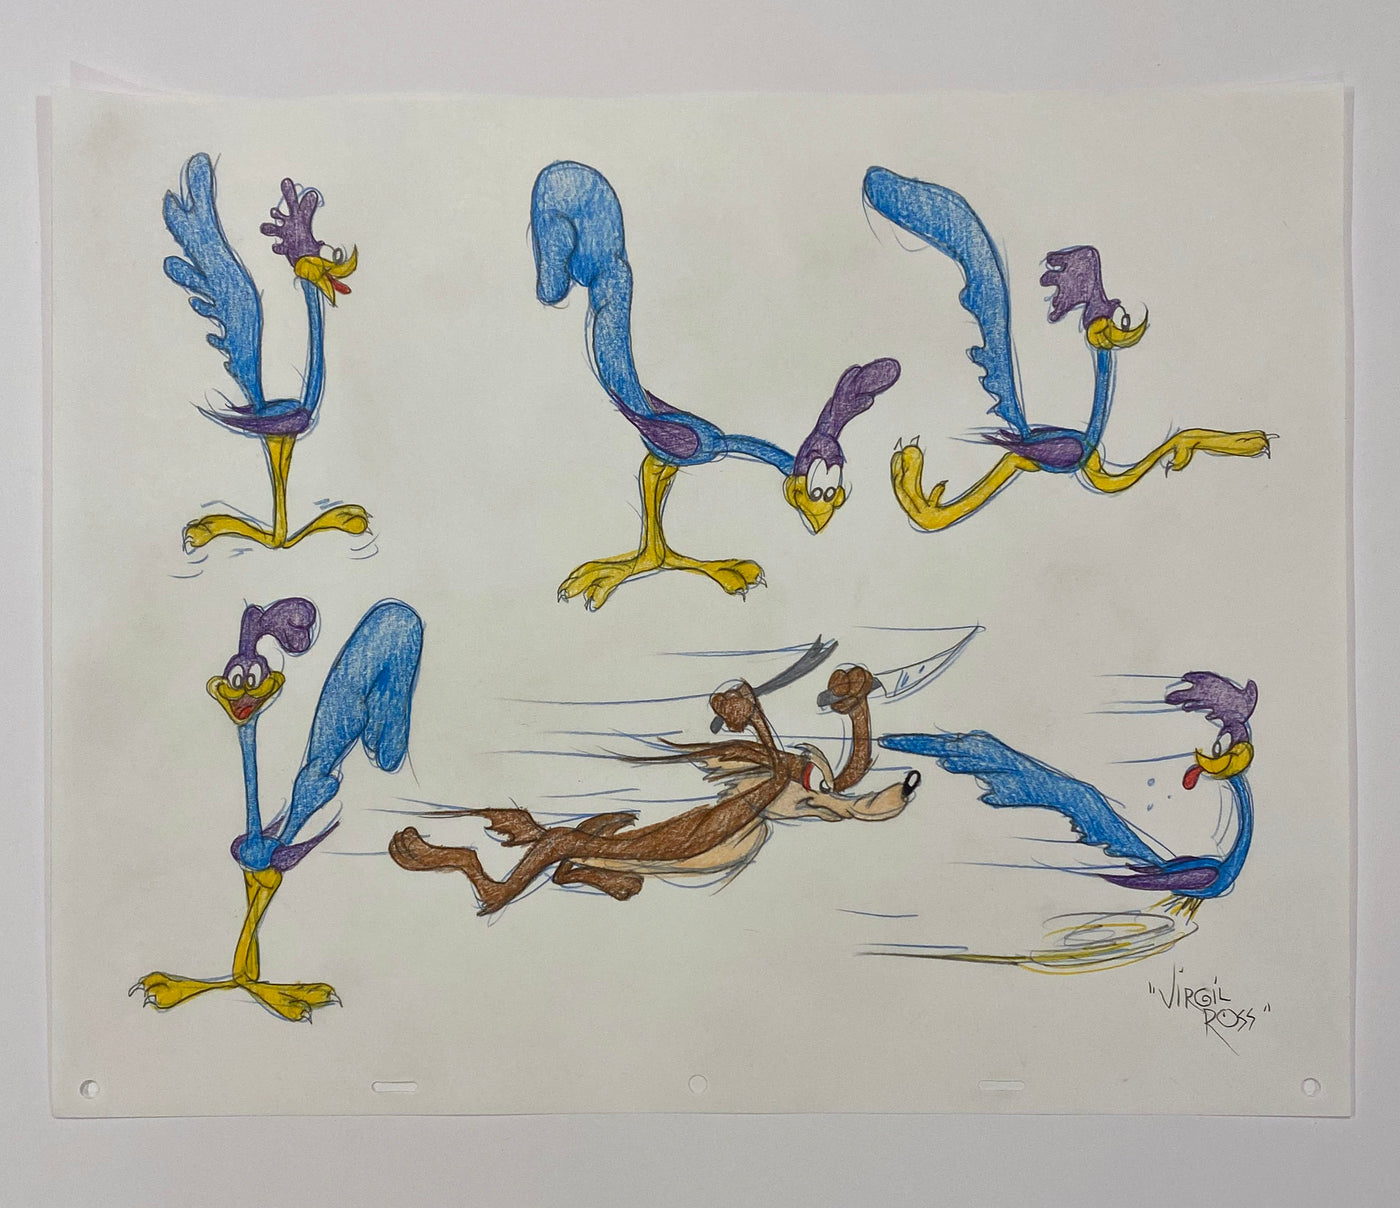 Original Warner Brothers Virgil Ross Model Sheet Animation Drawing featuring Road Runner and Wile E. Coyote